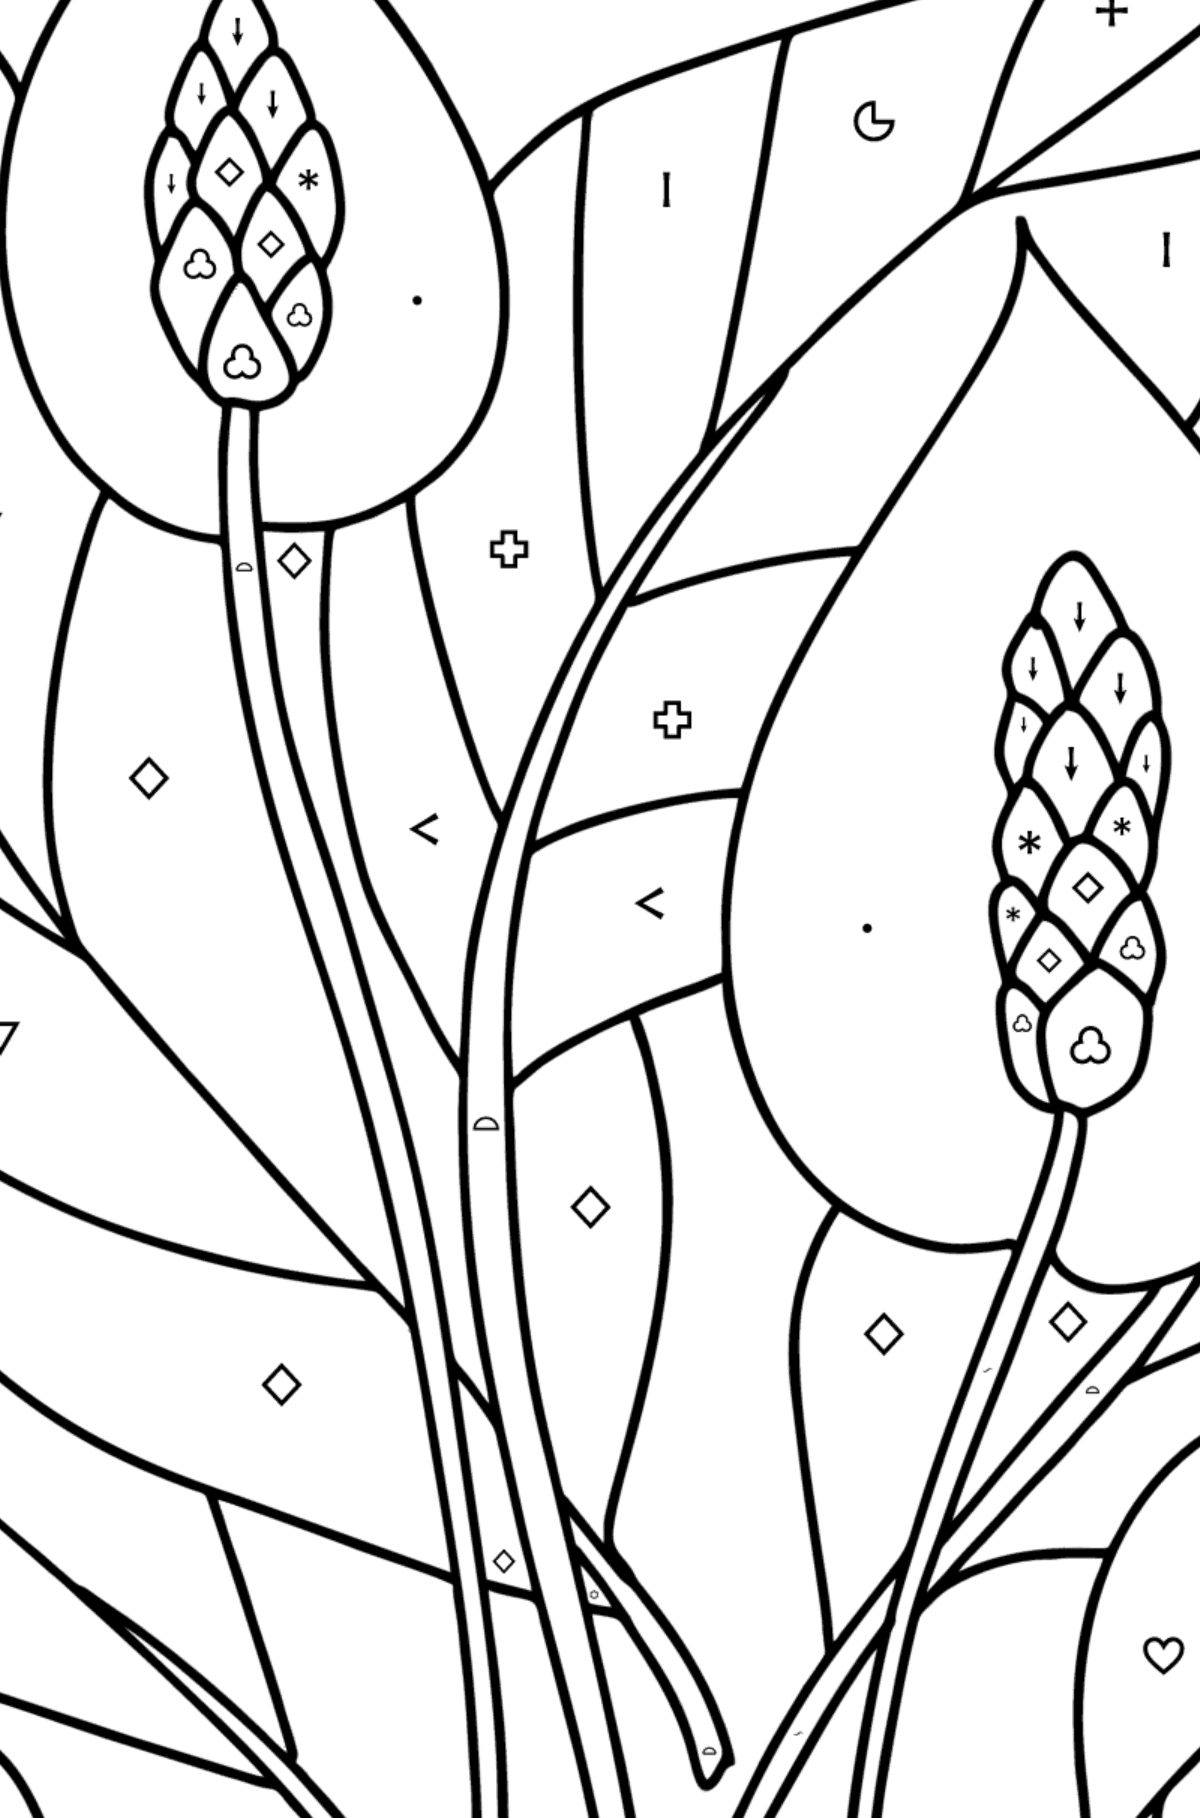 Spathiphyllum coloring page - Coloring by Symbols and Geometric Shapes for Kids